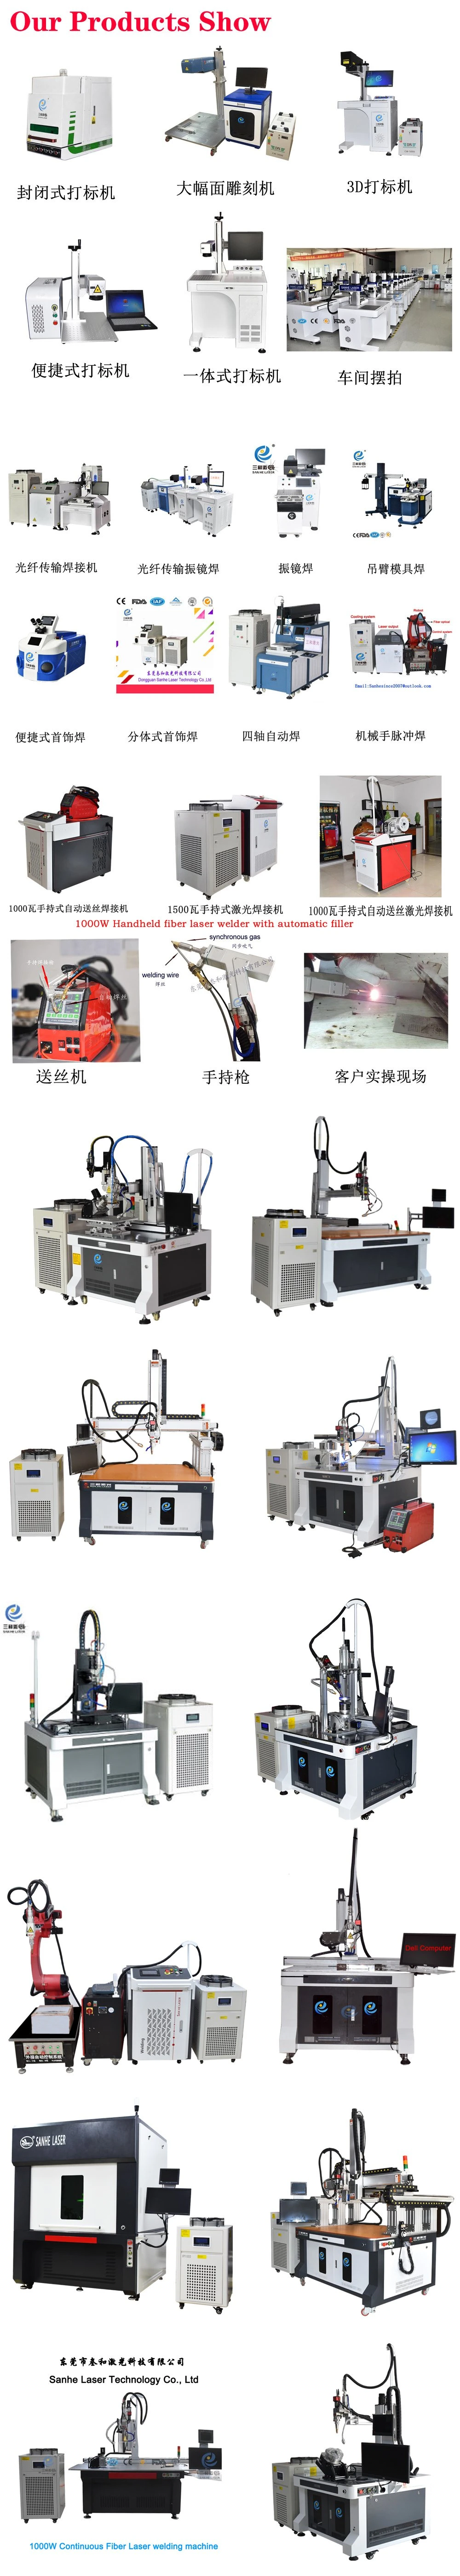 High Quality and High Speed Fiber Laser Cutting/Engraving Machine for Metal